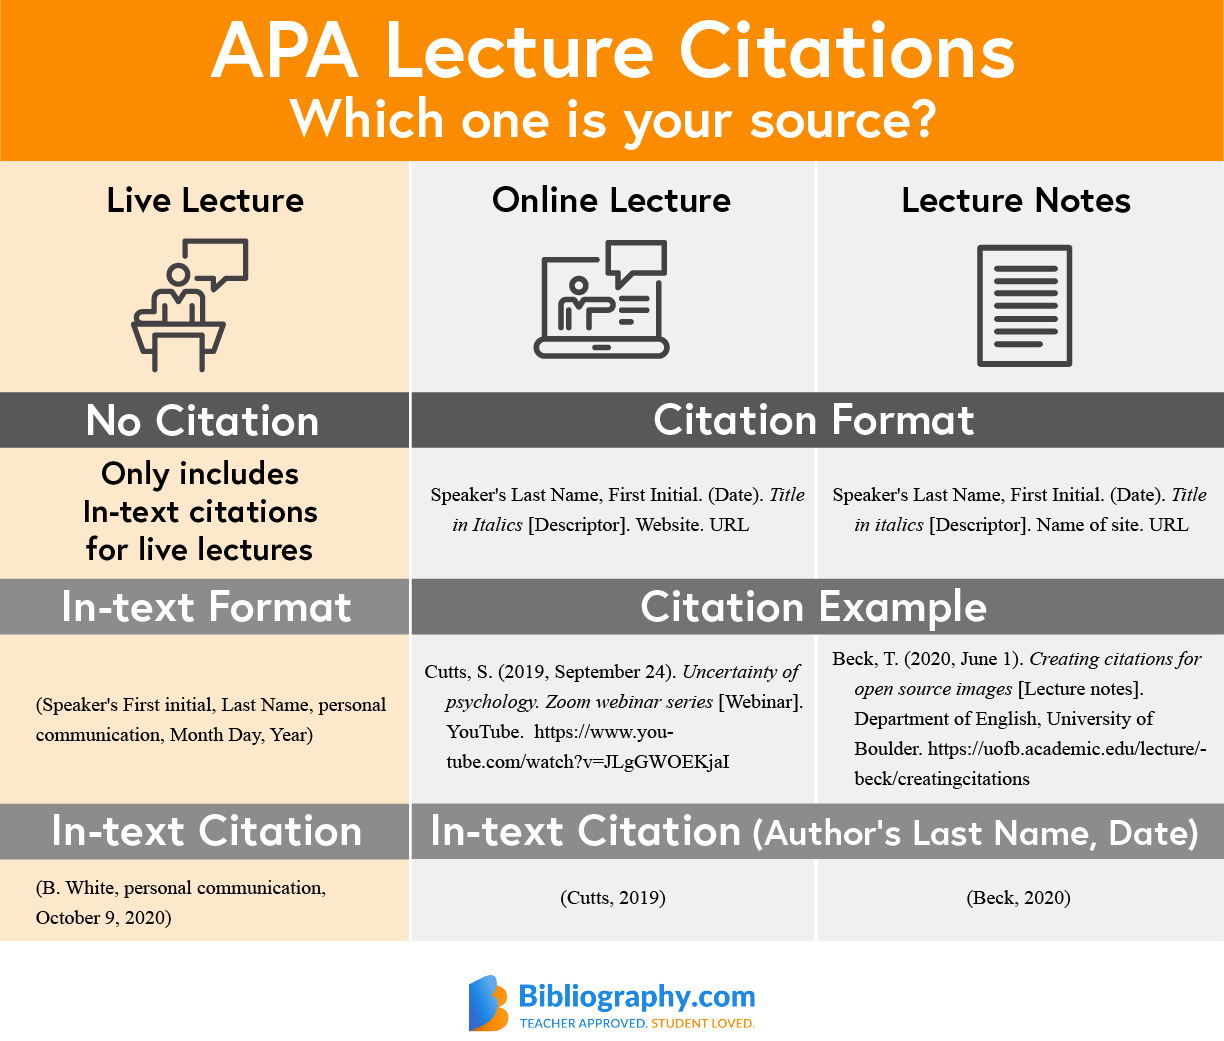 APA Lecture Citations infographic